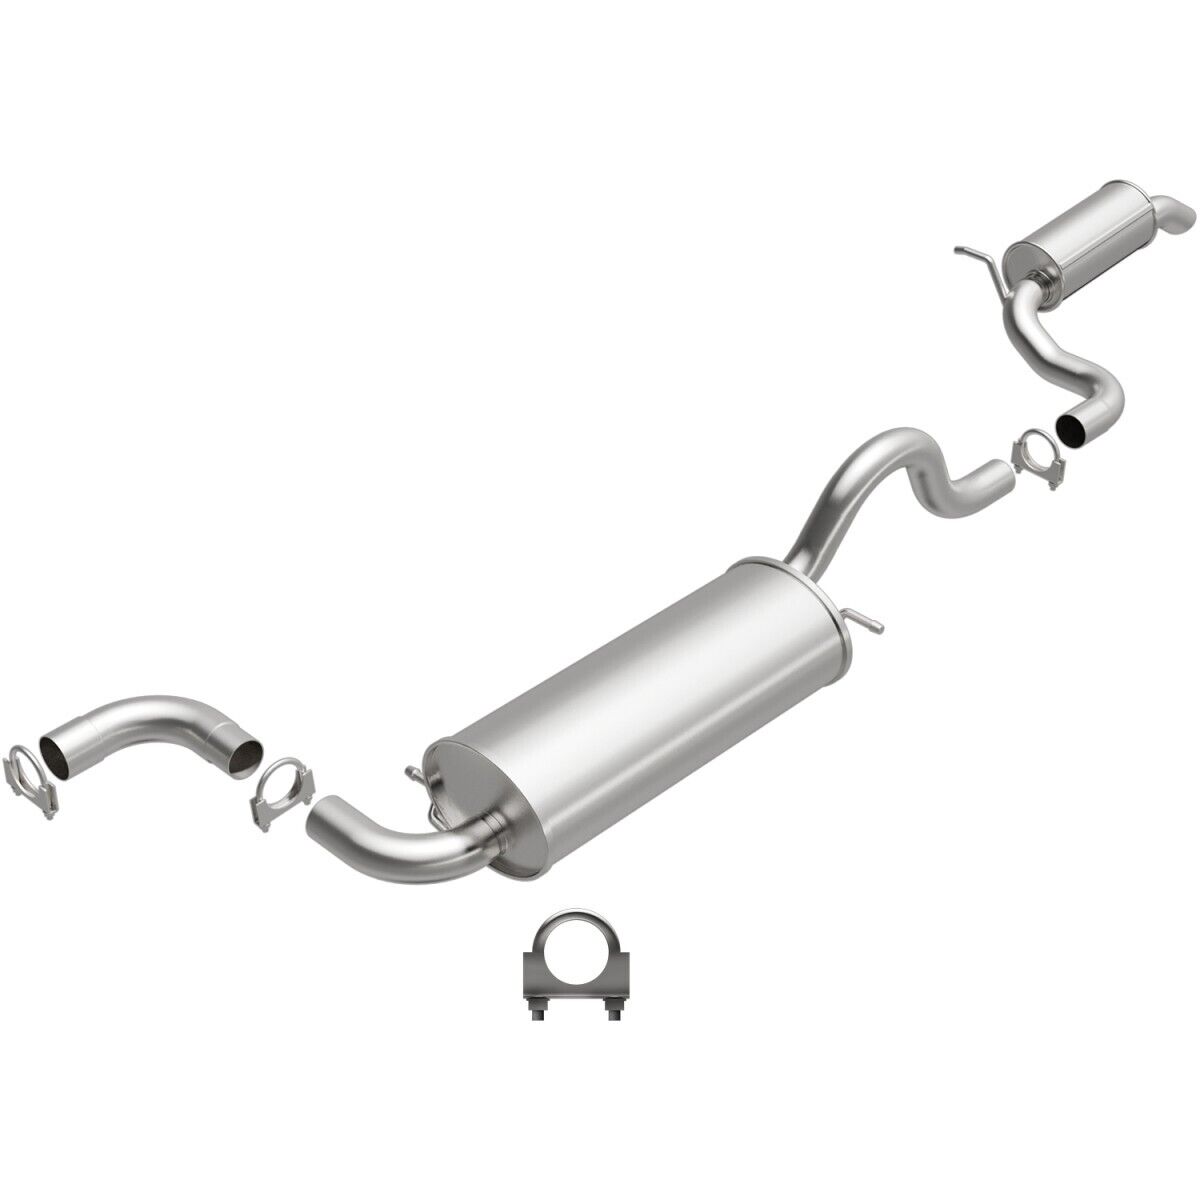 106-0024 BRExhaust Exhaust System for VW Town and Country Dodge Grand Caravan